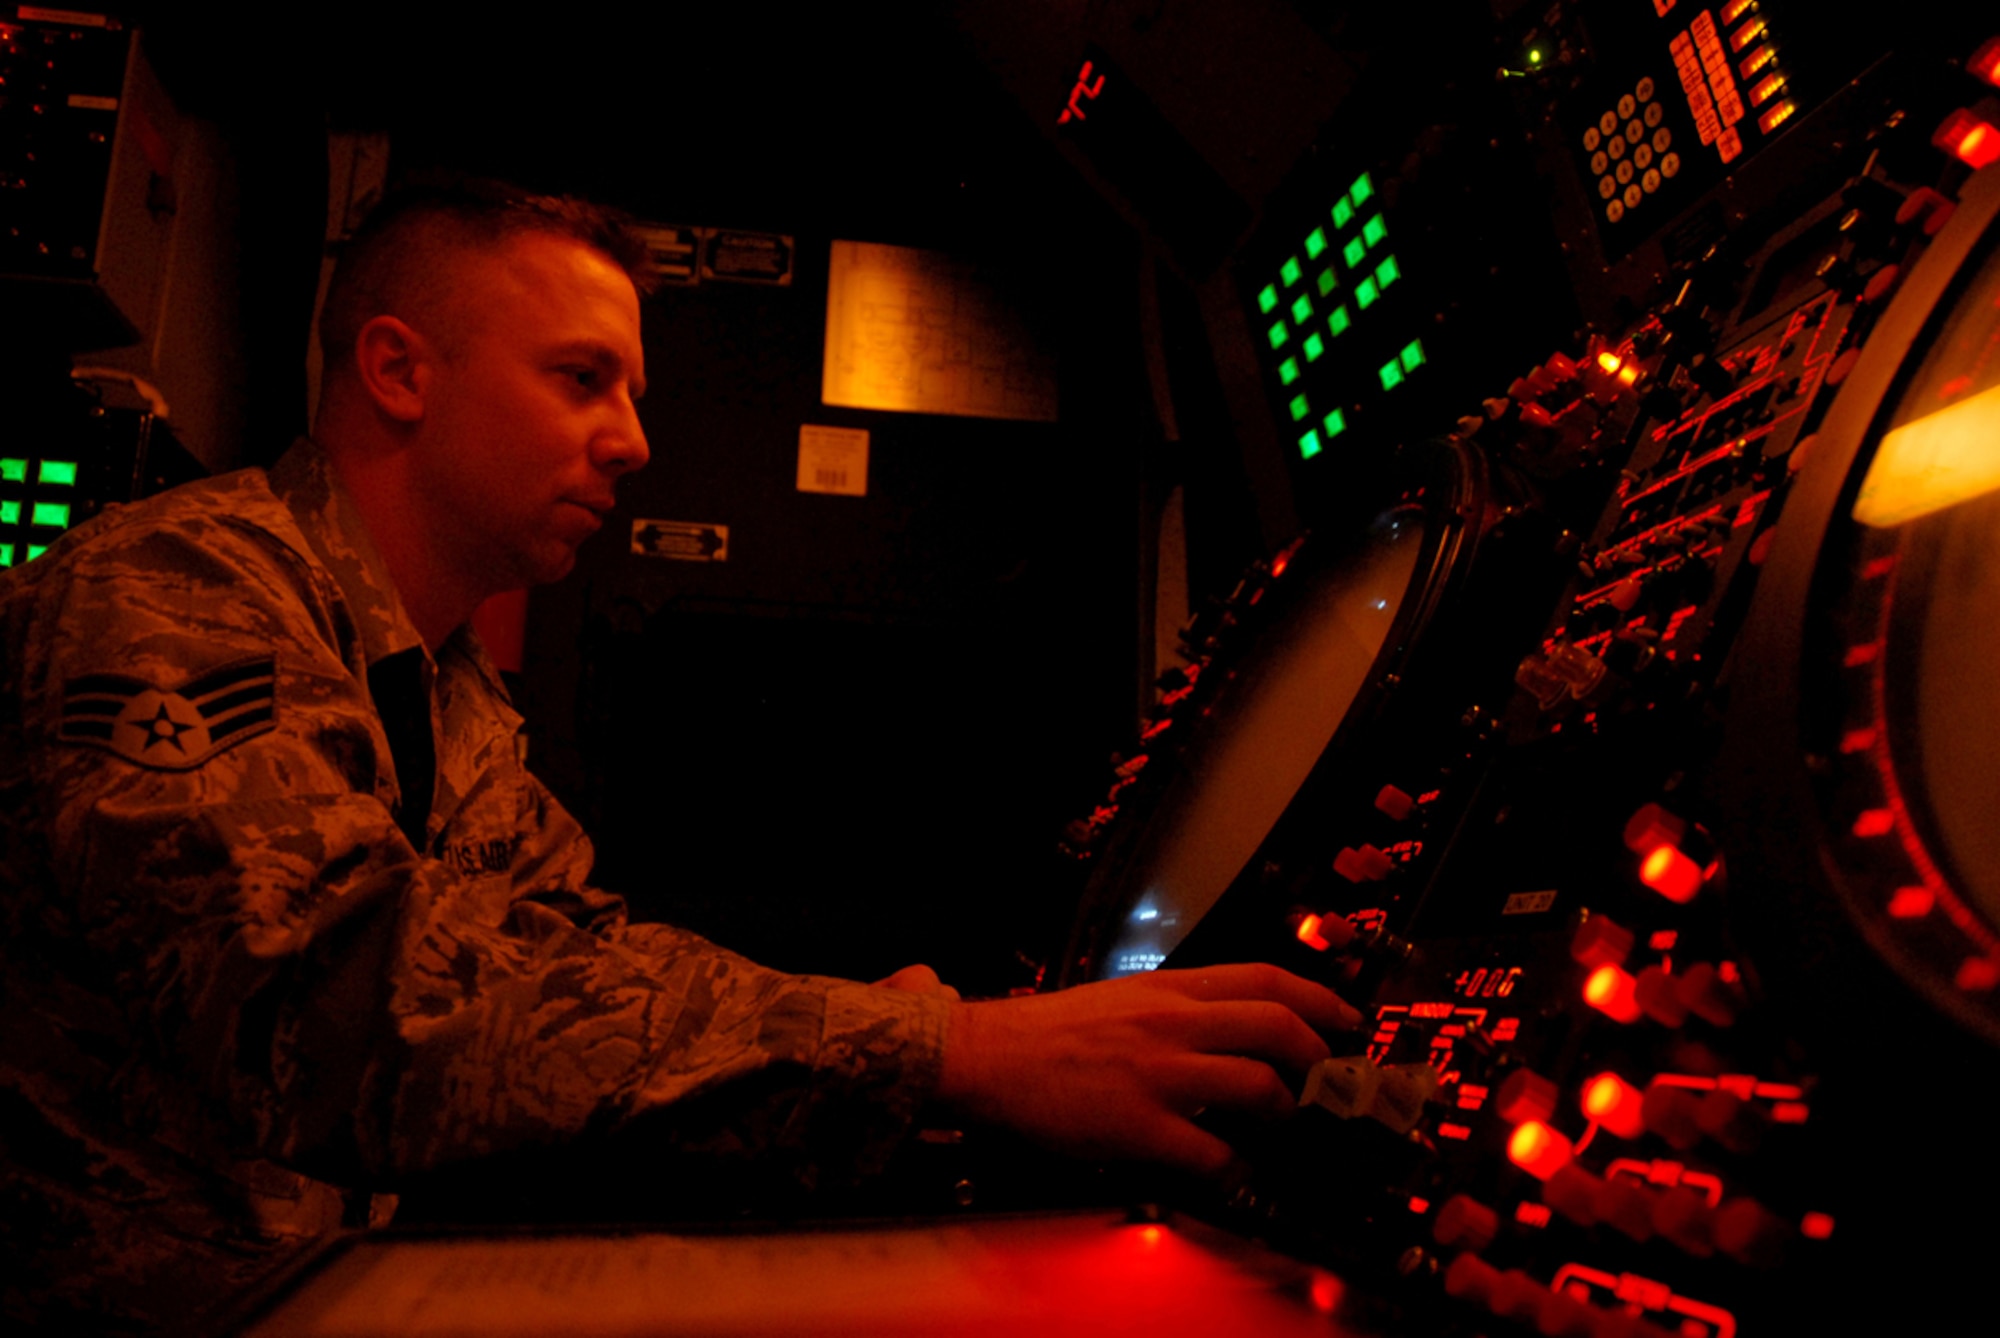 Senior Airman William Reid, 607th Air Control Squadron radar maintenance technician, looks for critical radar data on a scope inside the operations module.The 607th is a tennant unit of Luke, and conducts initial qualification training for operations crew personnel assigned to ACSs. 